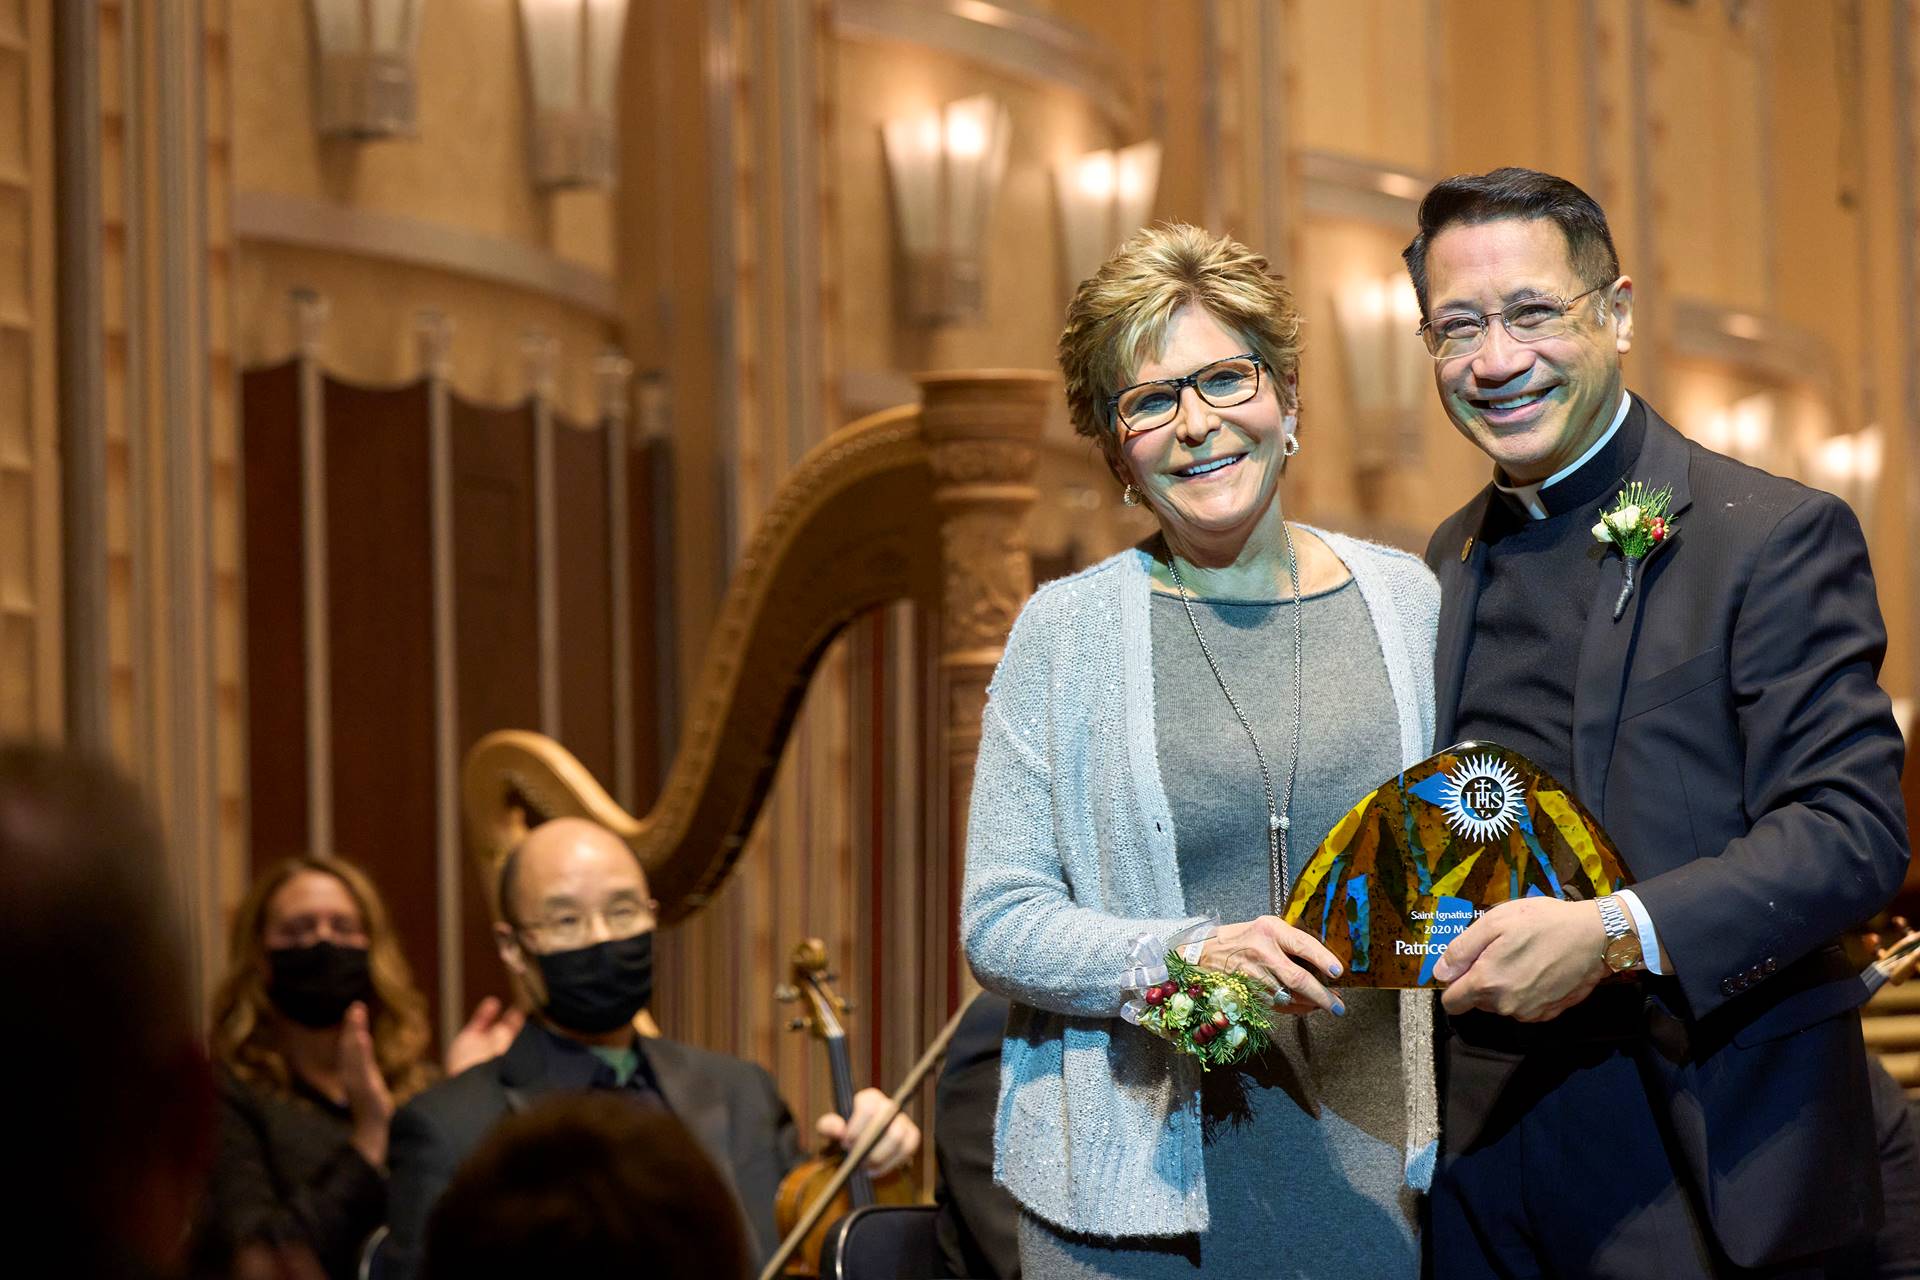 Patrice Campbell and Fr. Ray Guiao at Severance Music Center